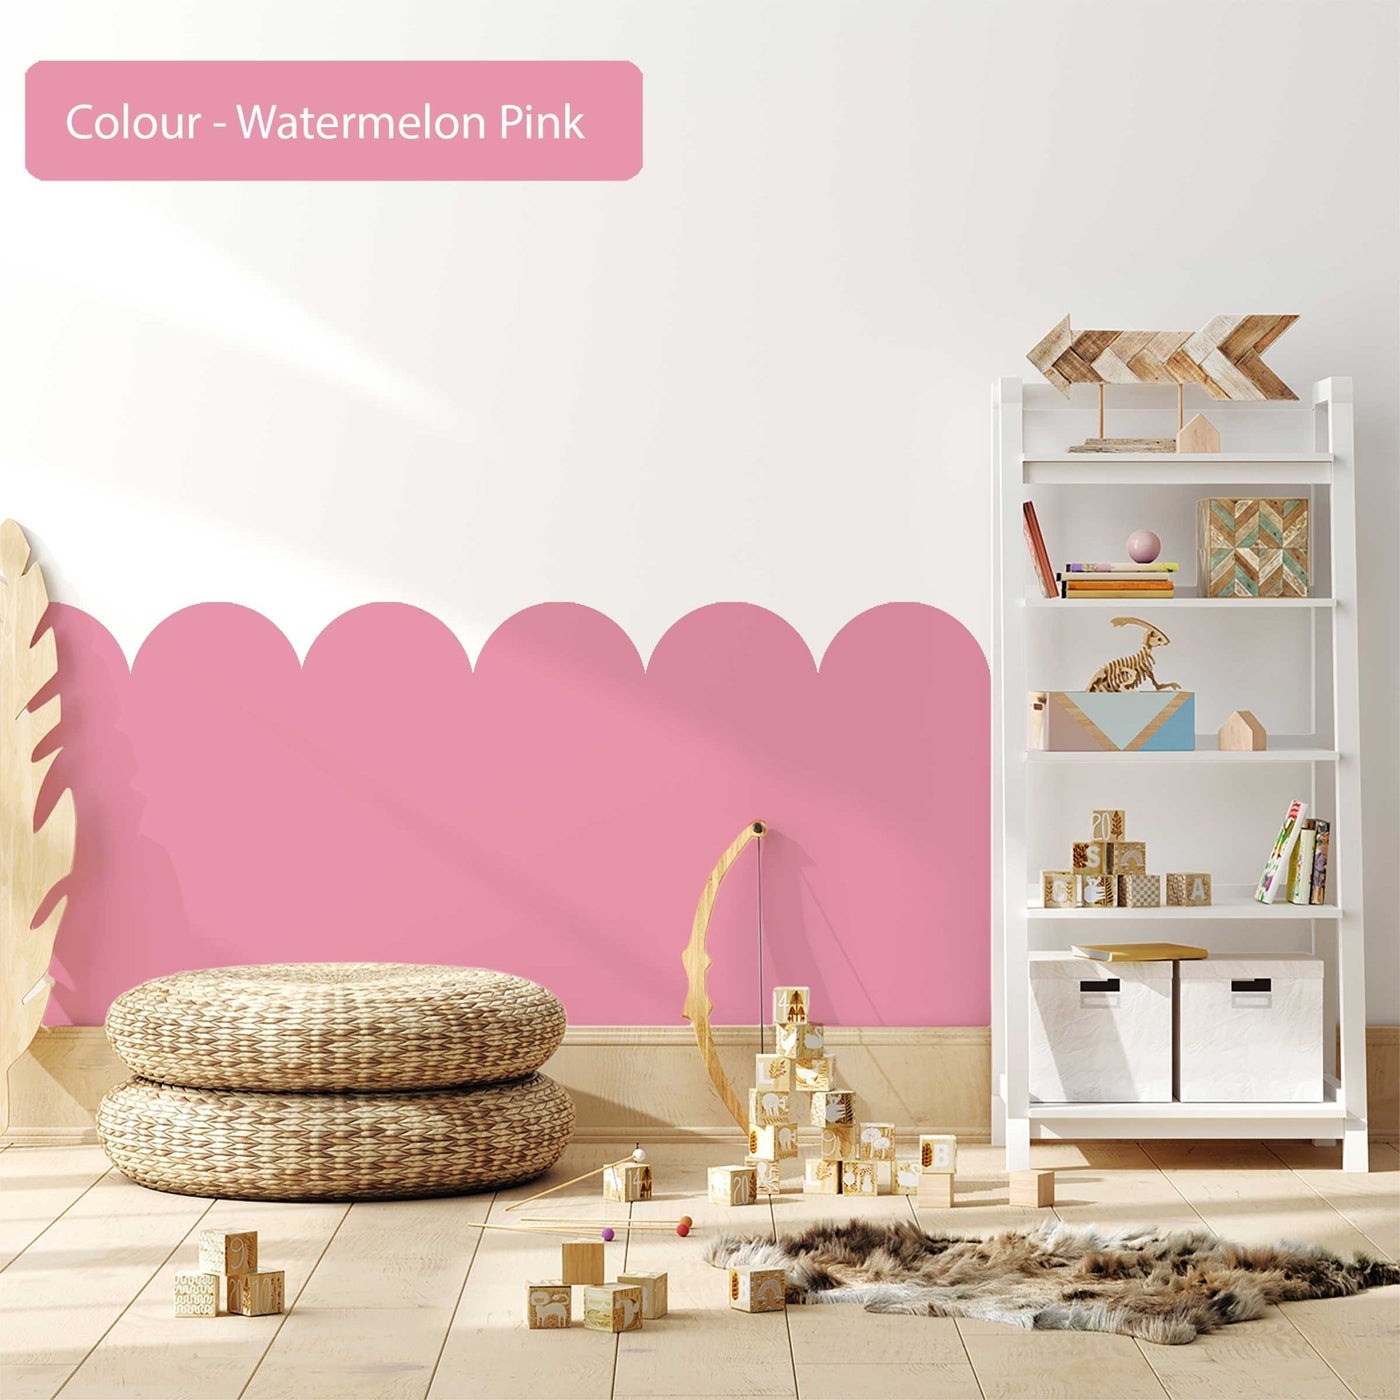 Pink Scallop Wall Decals - Jack Harry and Ollie